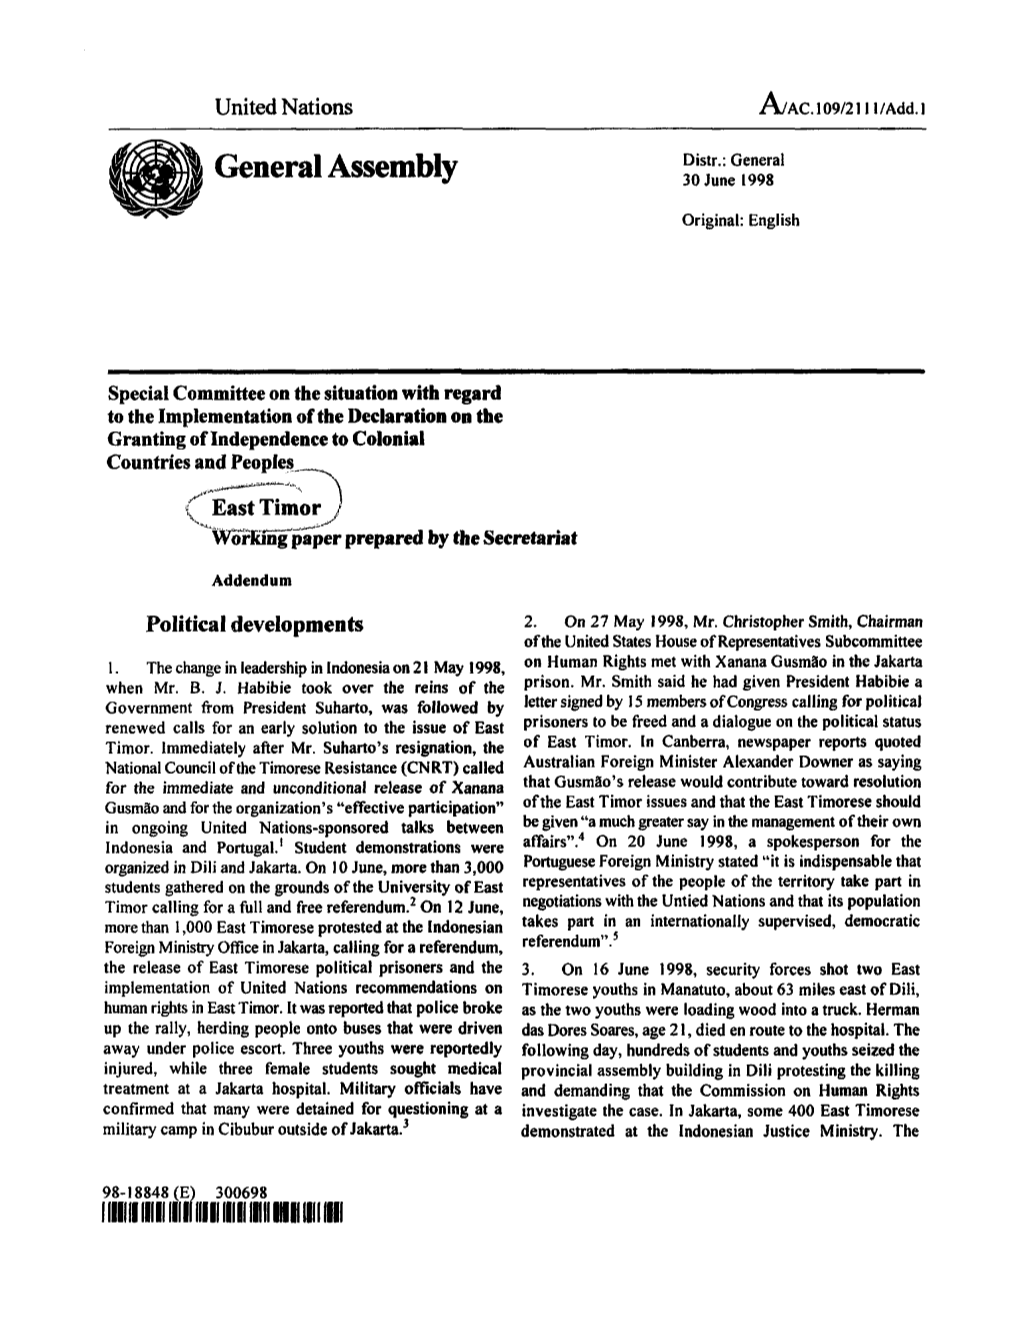 General Assembly 30 June 1998